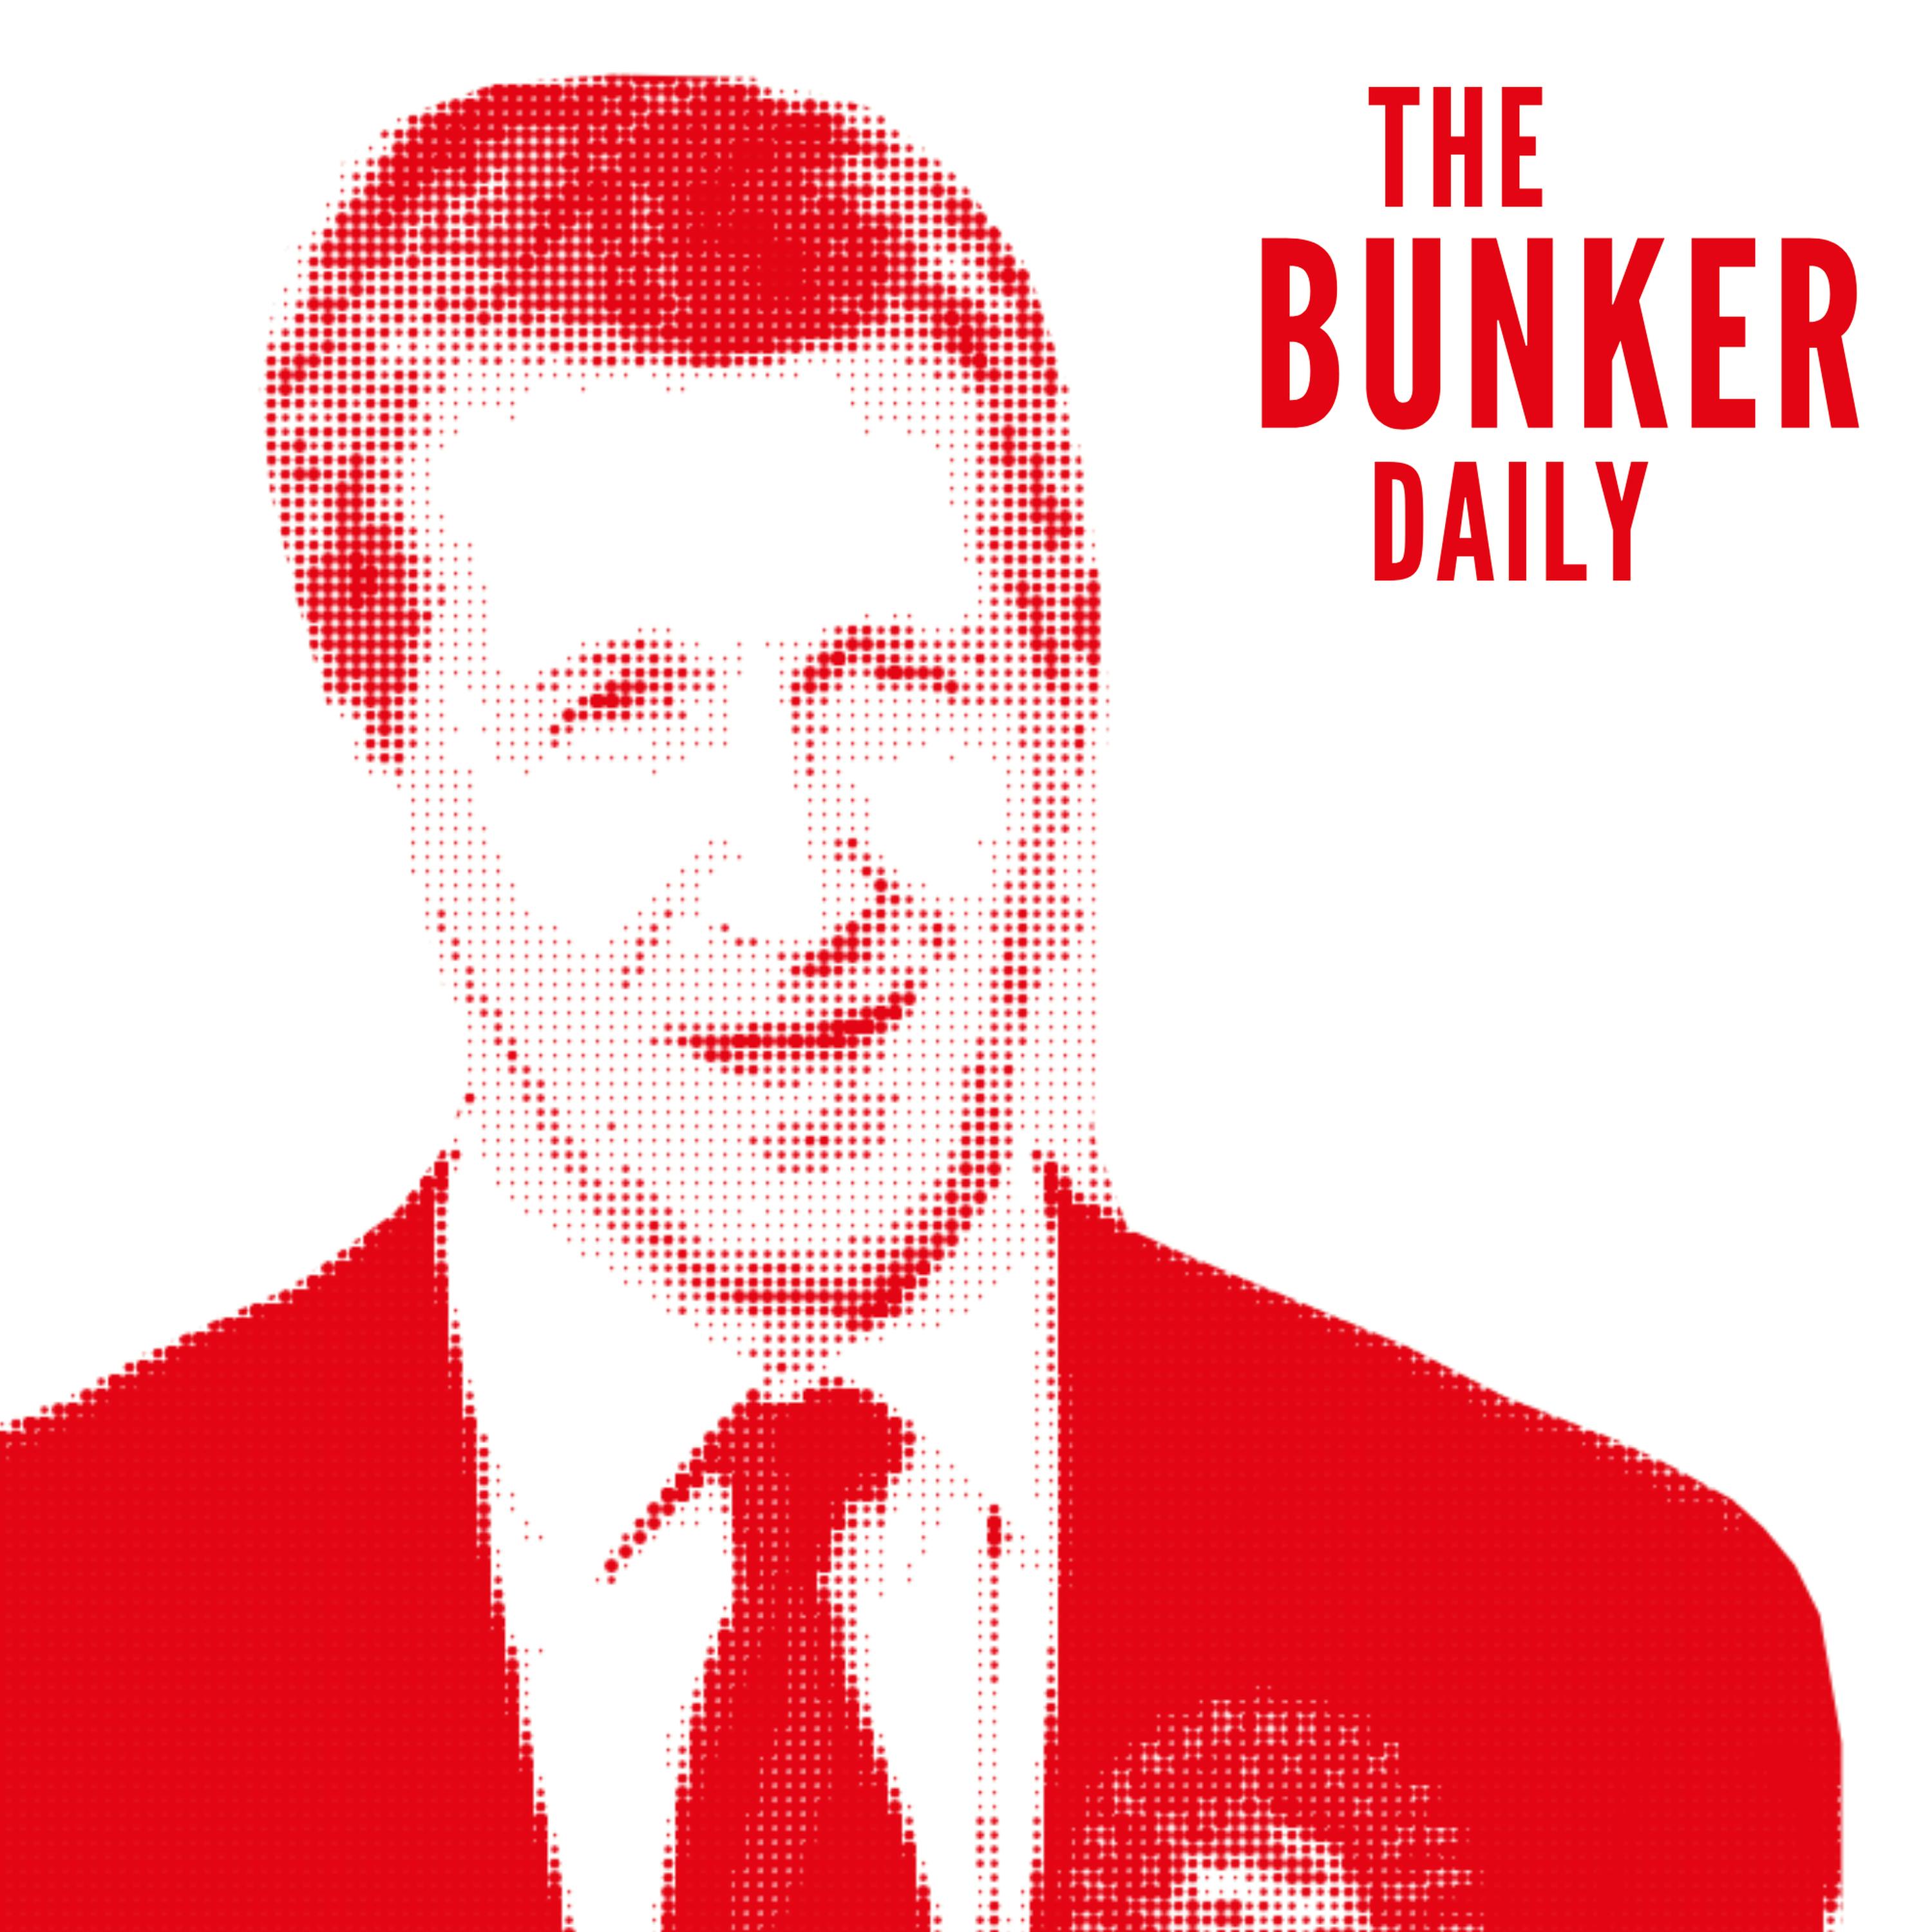 Daily: Why Labour needs to love our country, with Dan Jarvis